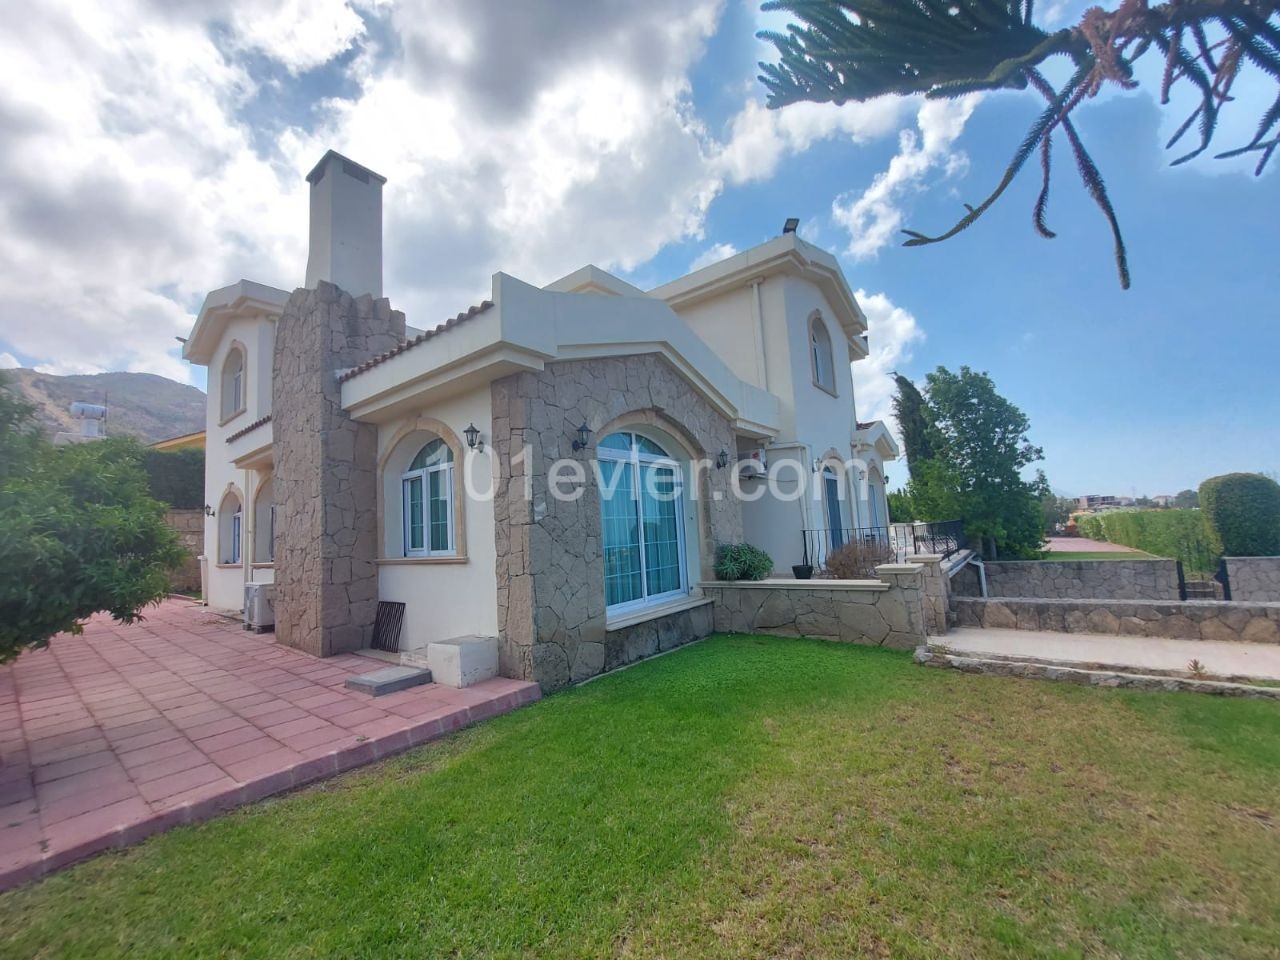 420 m2 Luxury Villa for Sale with Magnificent Mountain and Sea Views on Close to 1.5 Acres of Land in Çatalköy.. ** 